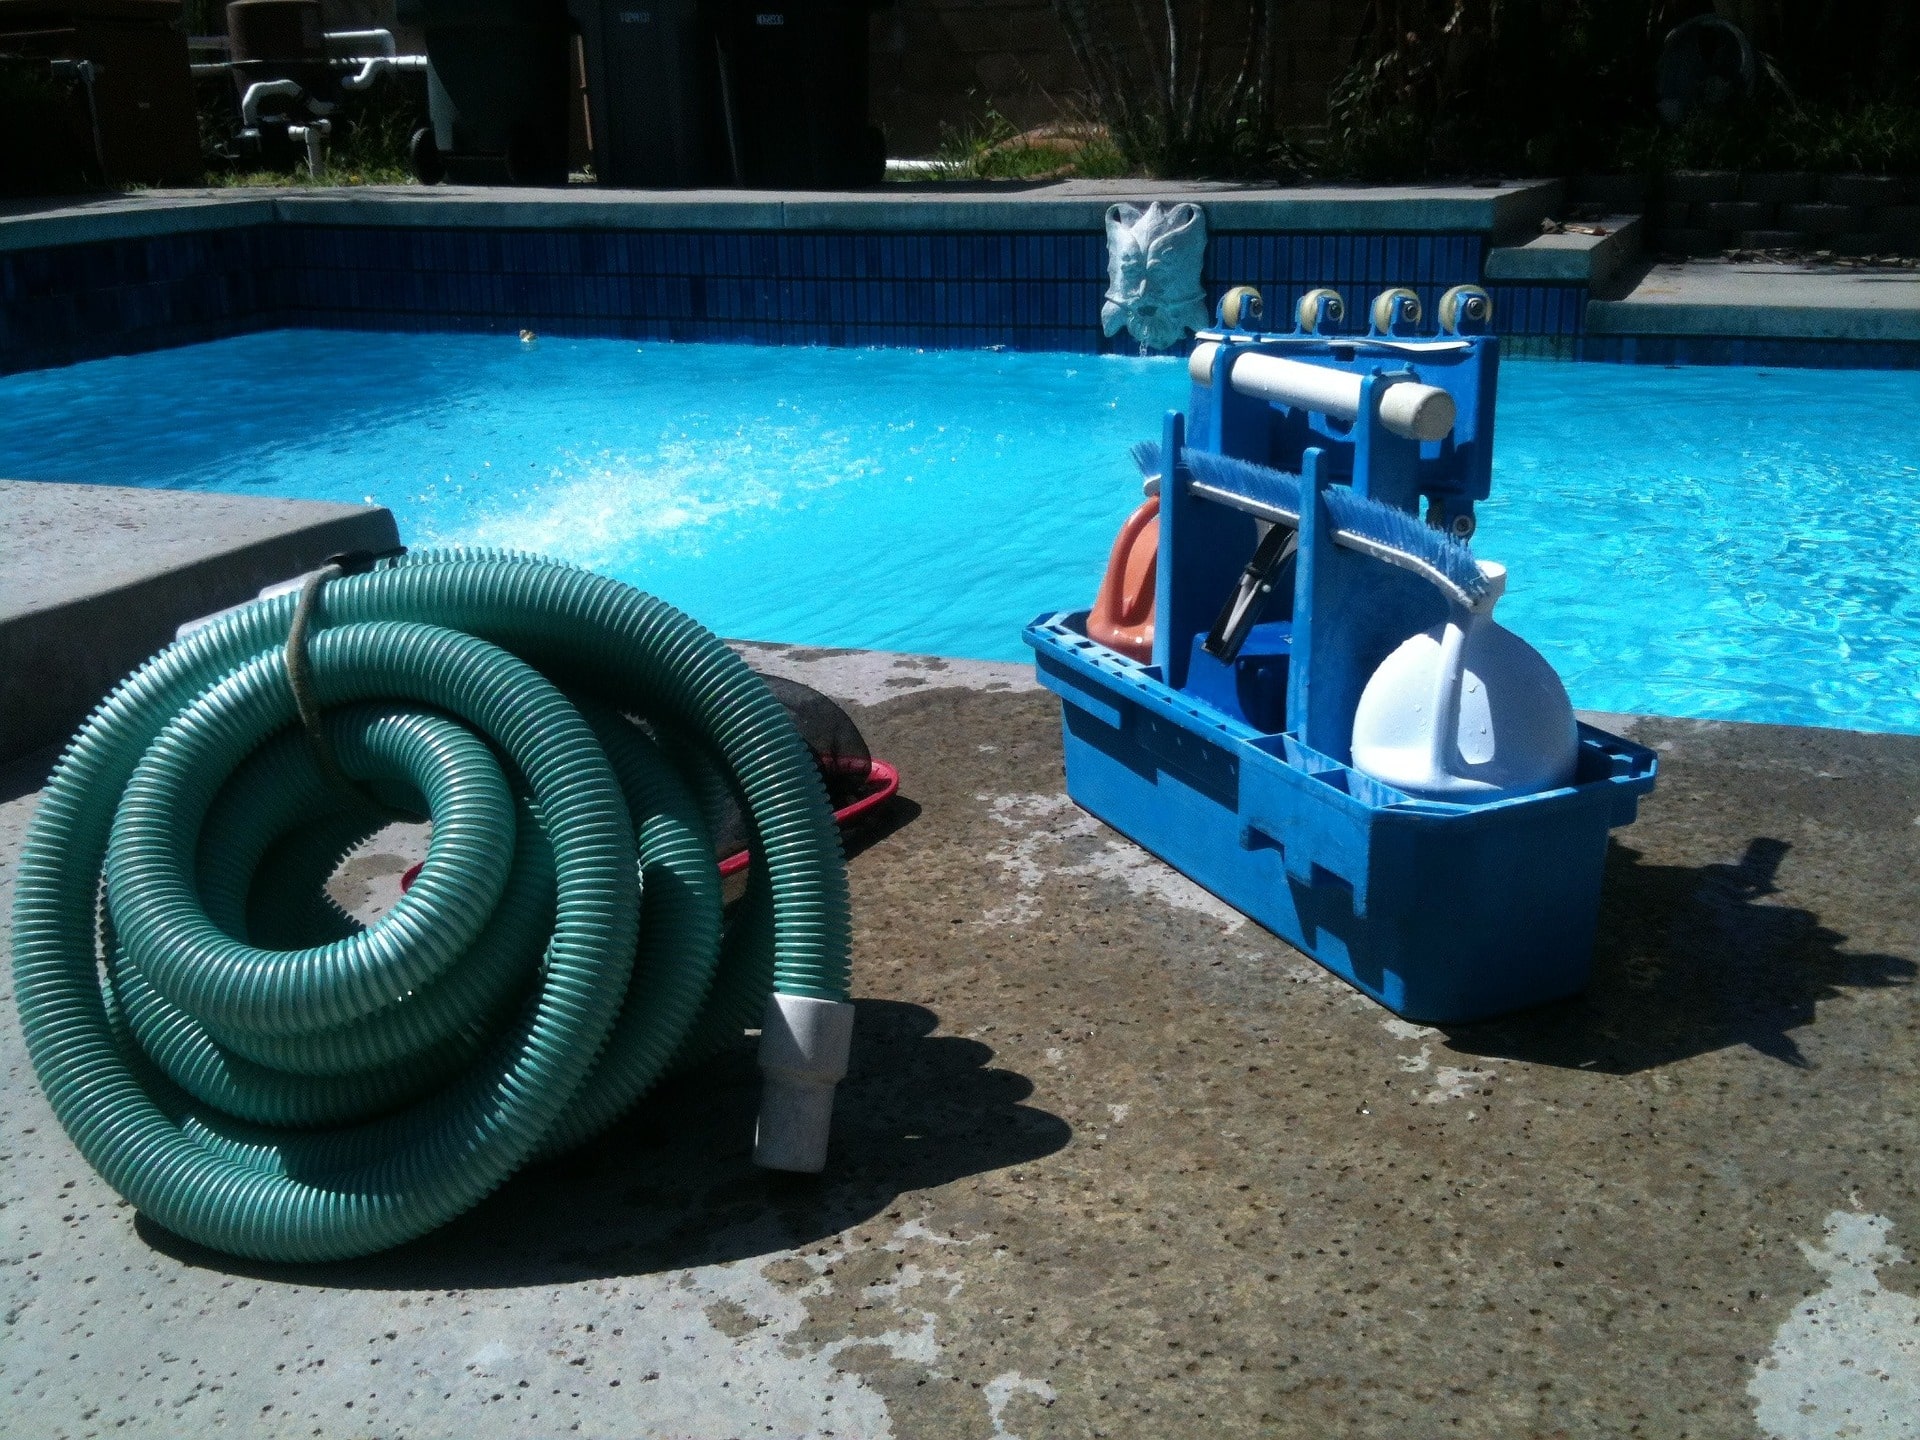 6 Tips to Save Money on Pool Maintenance